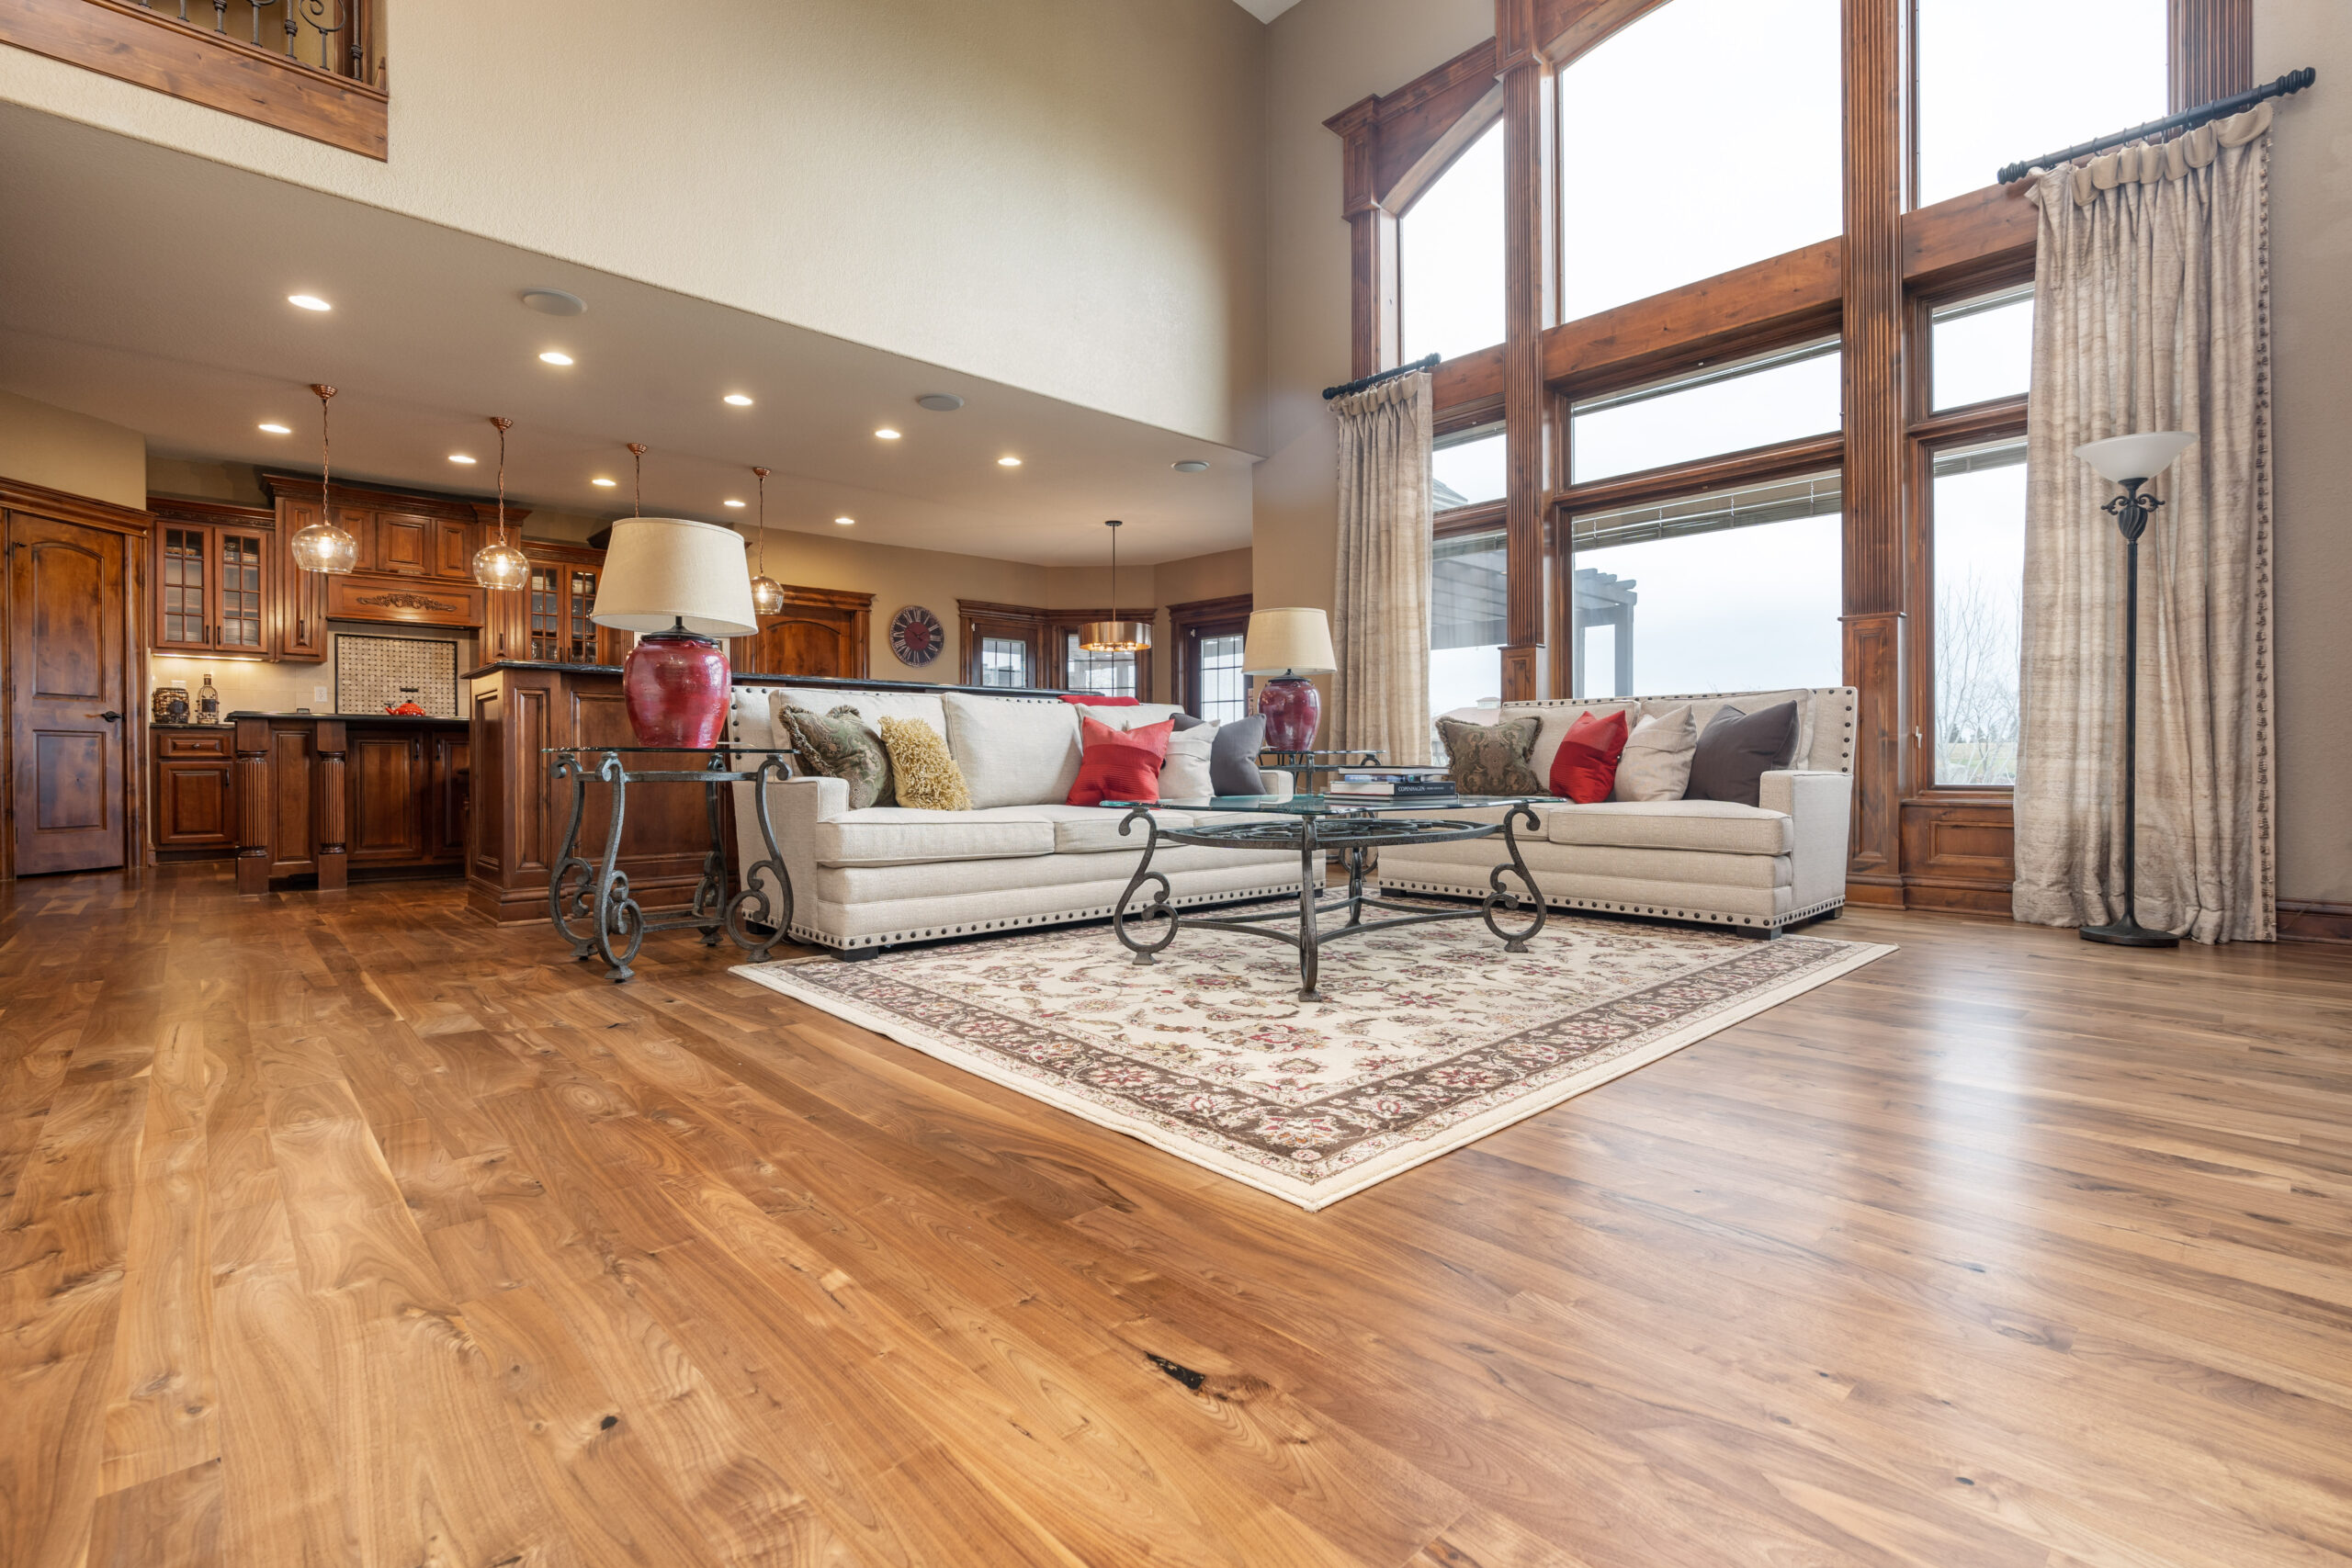 Pros & Cons of Different Wood Floor Finishes